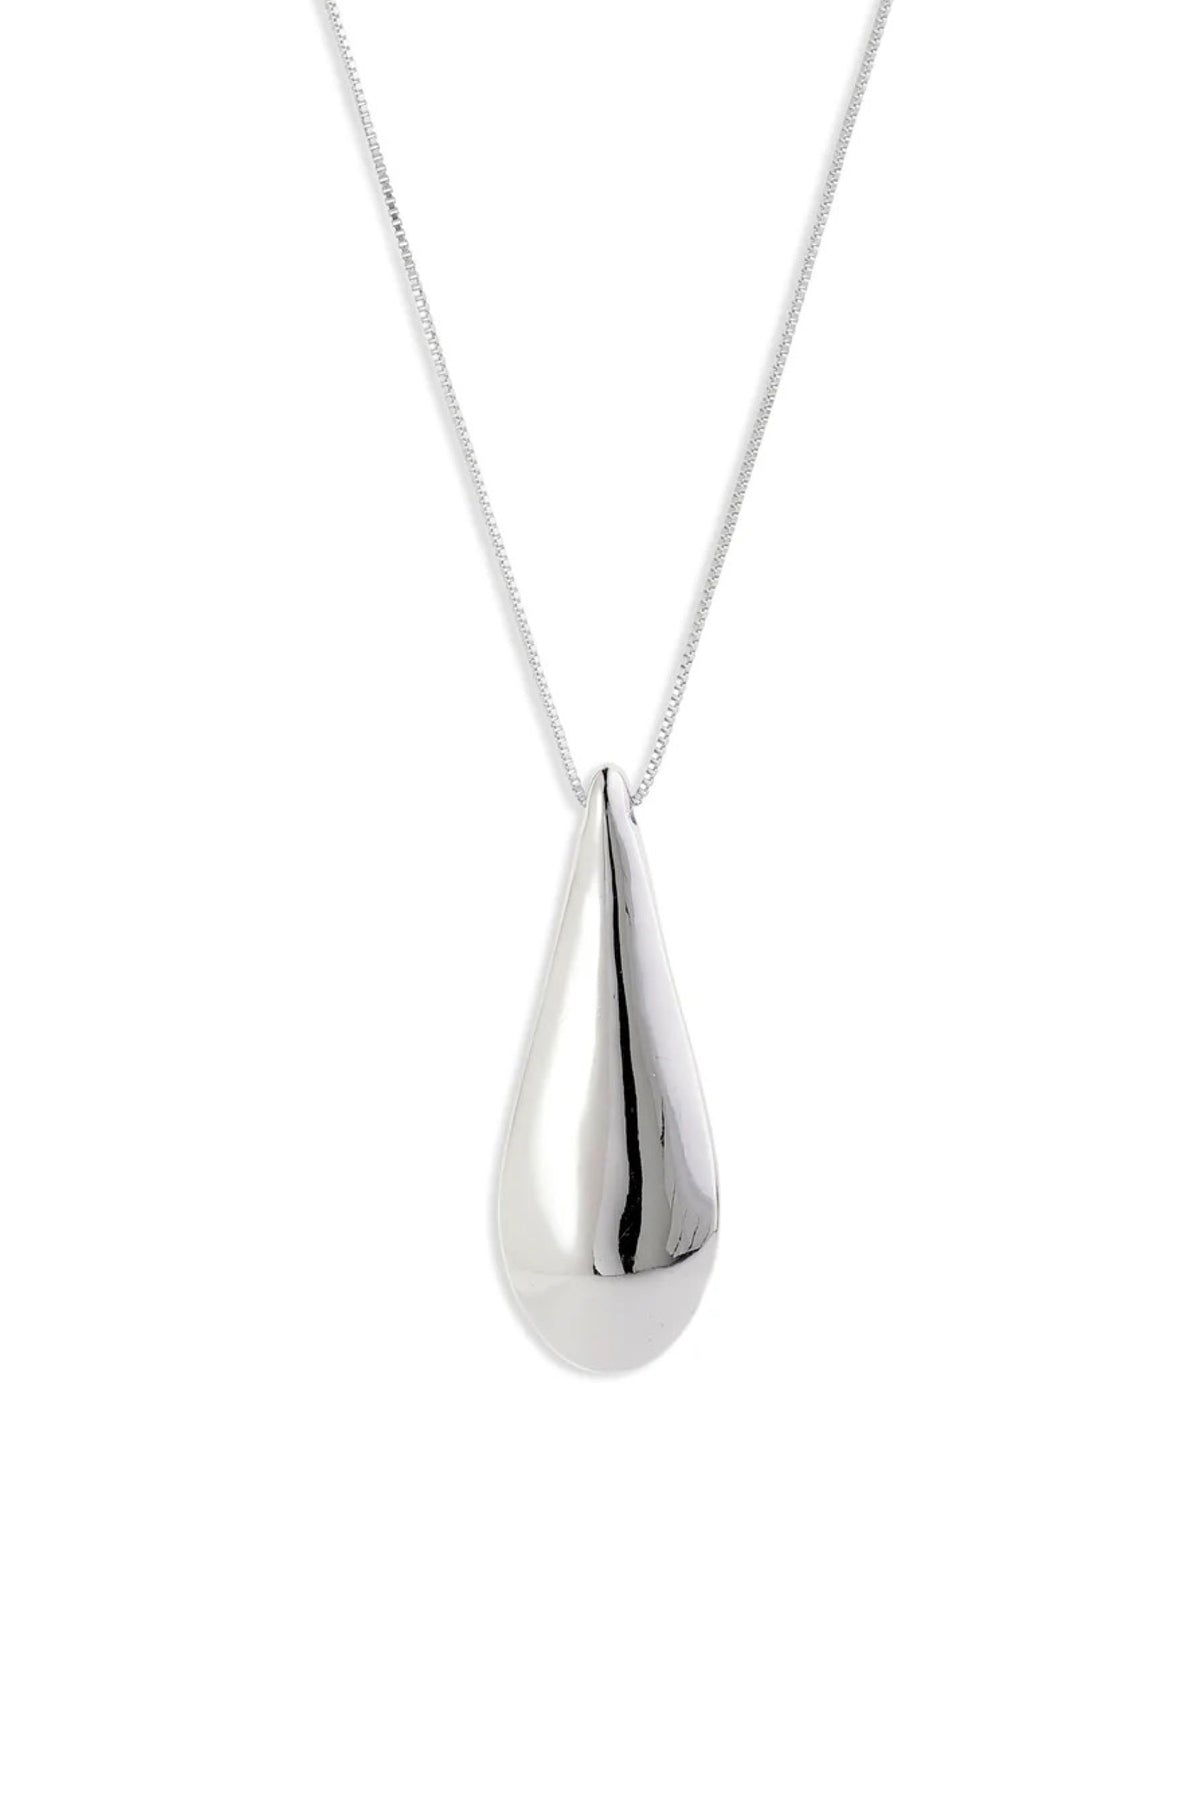 Alma Pi Necklace - Silver Plated